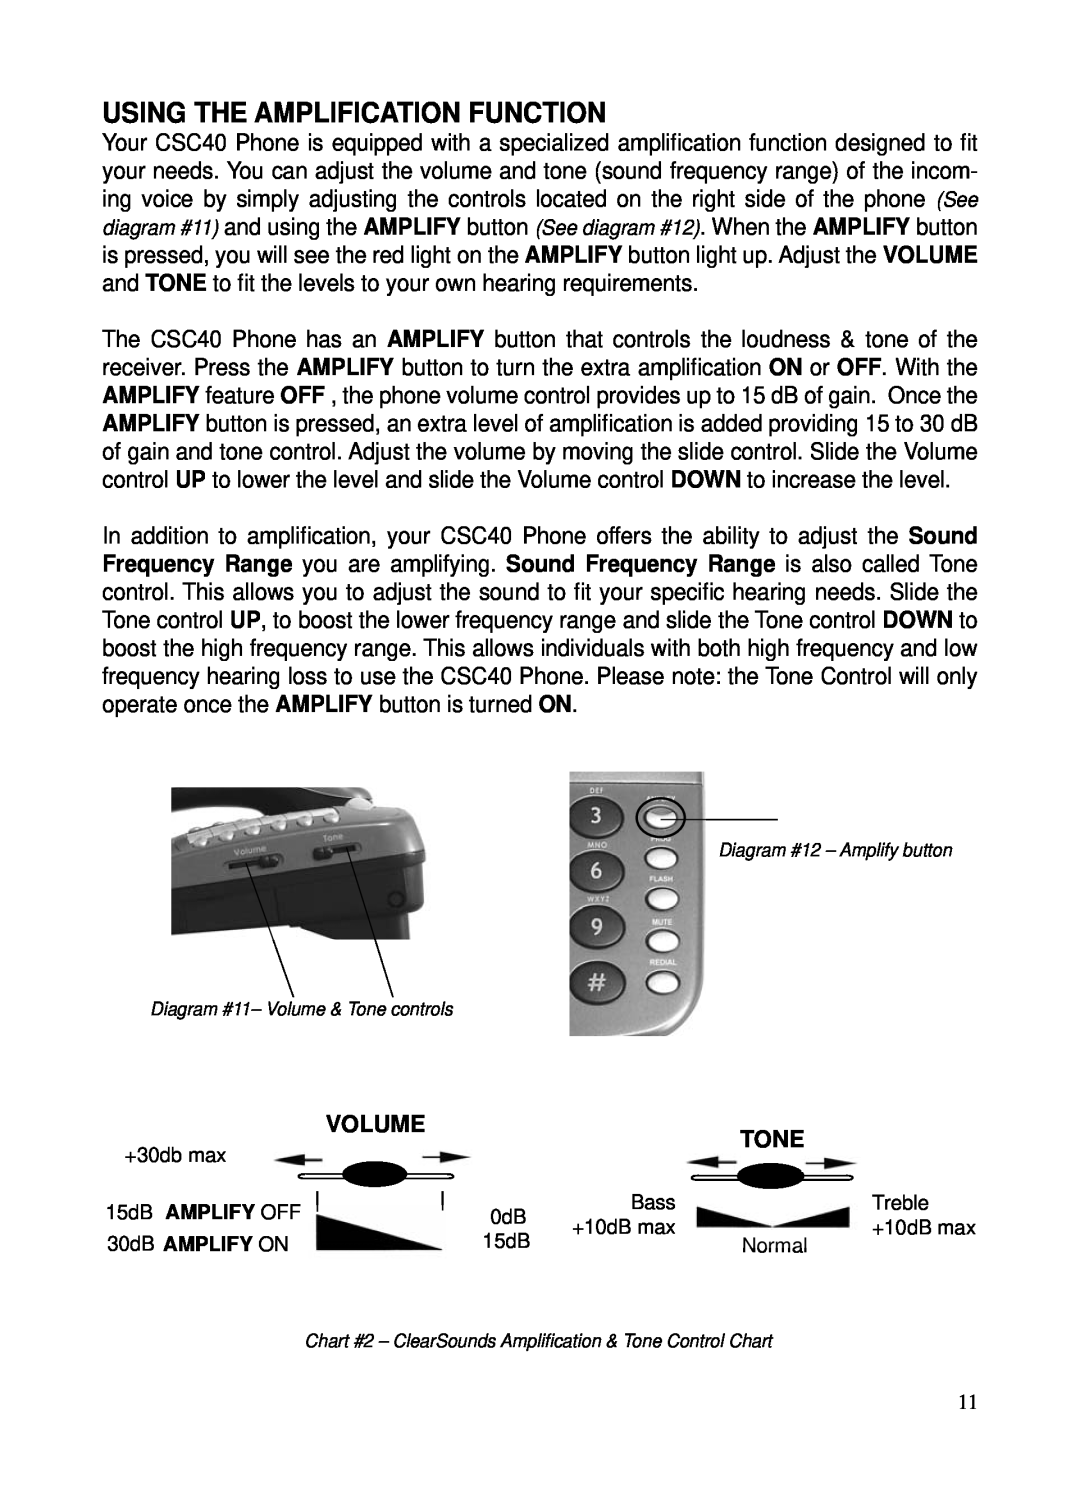 ClearSounds CSC40 user manual Using The Amplification Function, Volume, Tone 